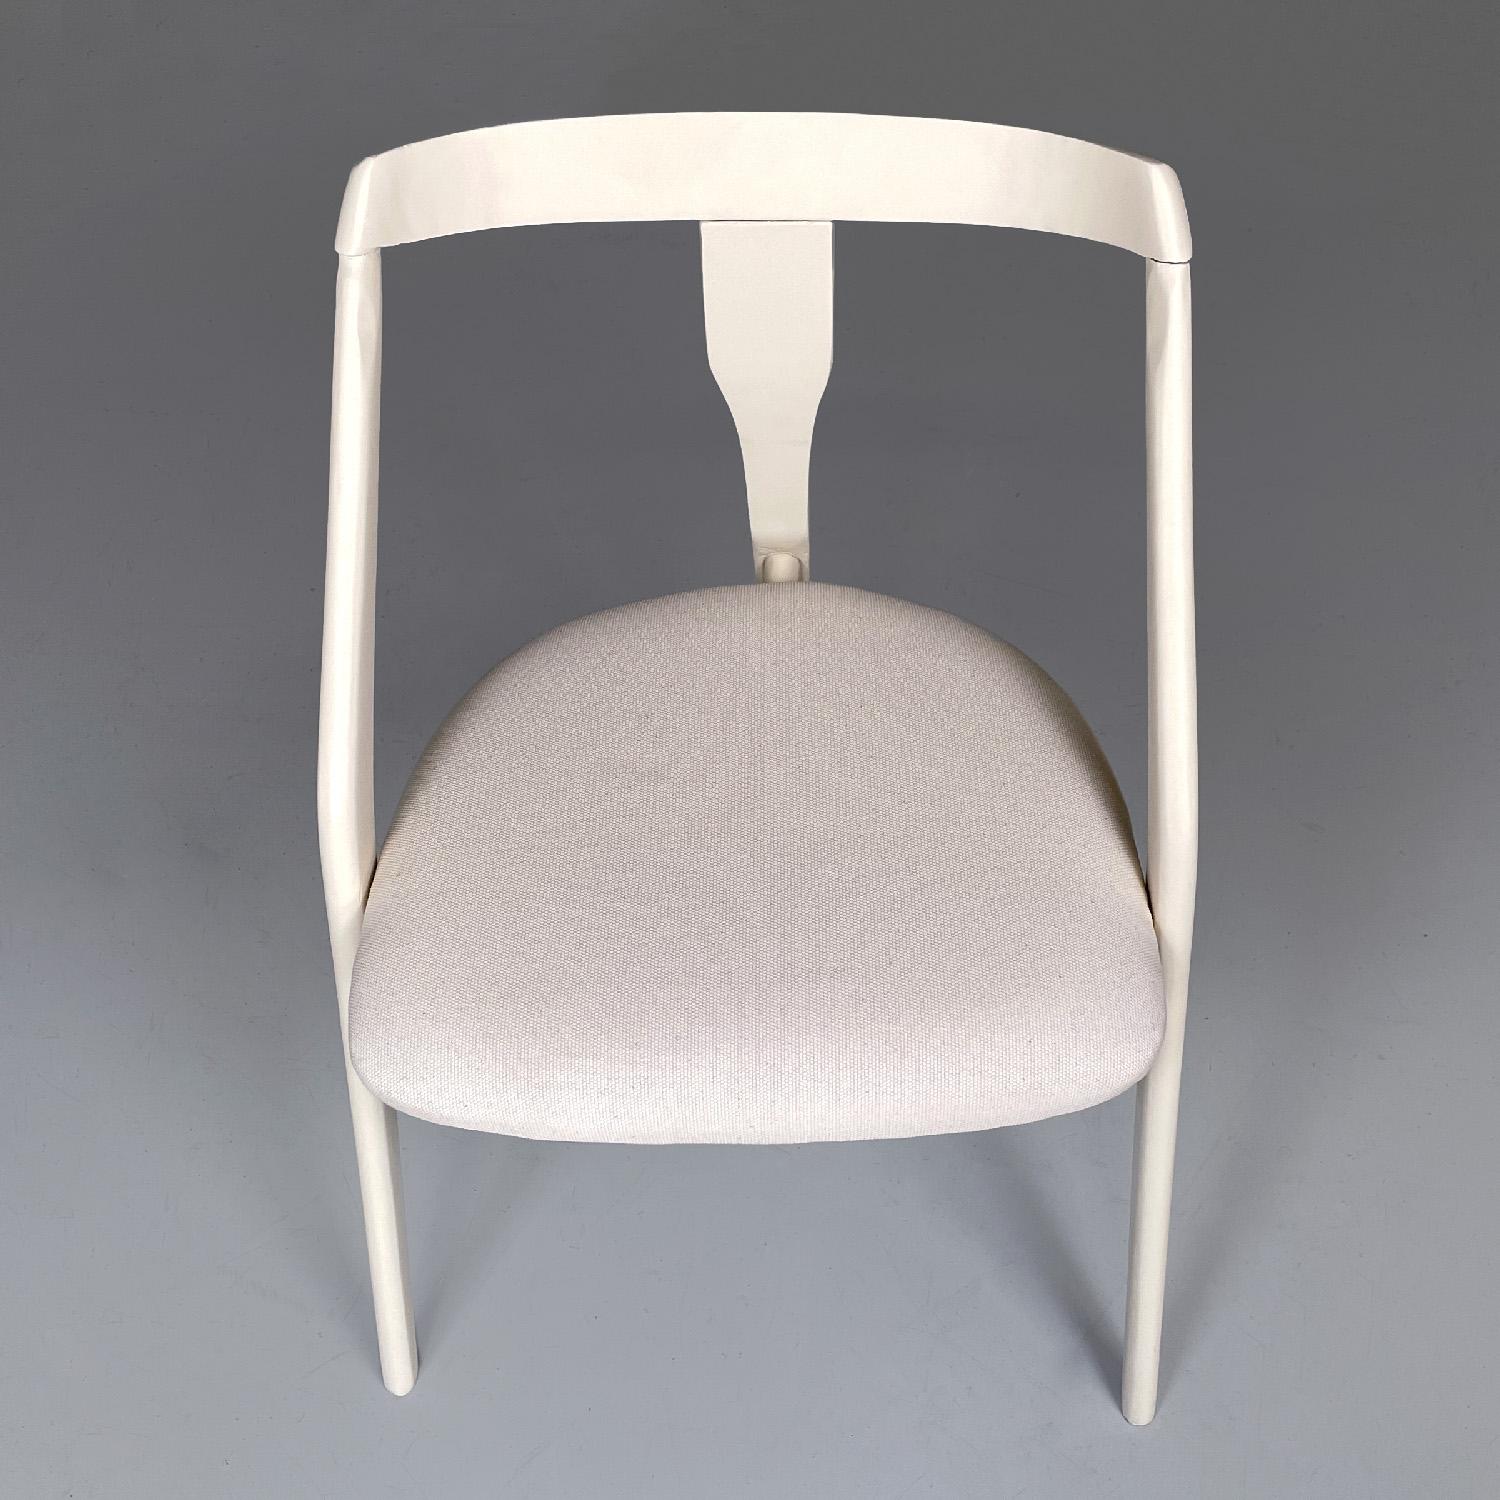 Italian mid-century modern white wood and fabric chairs, 1960s For Sale 1